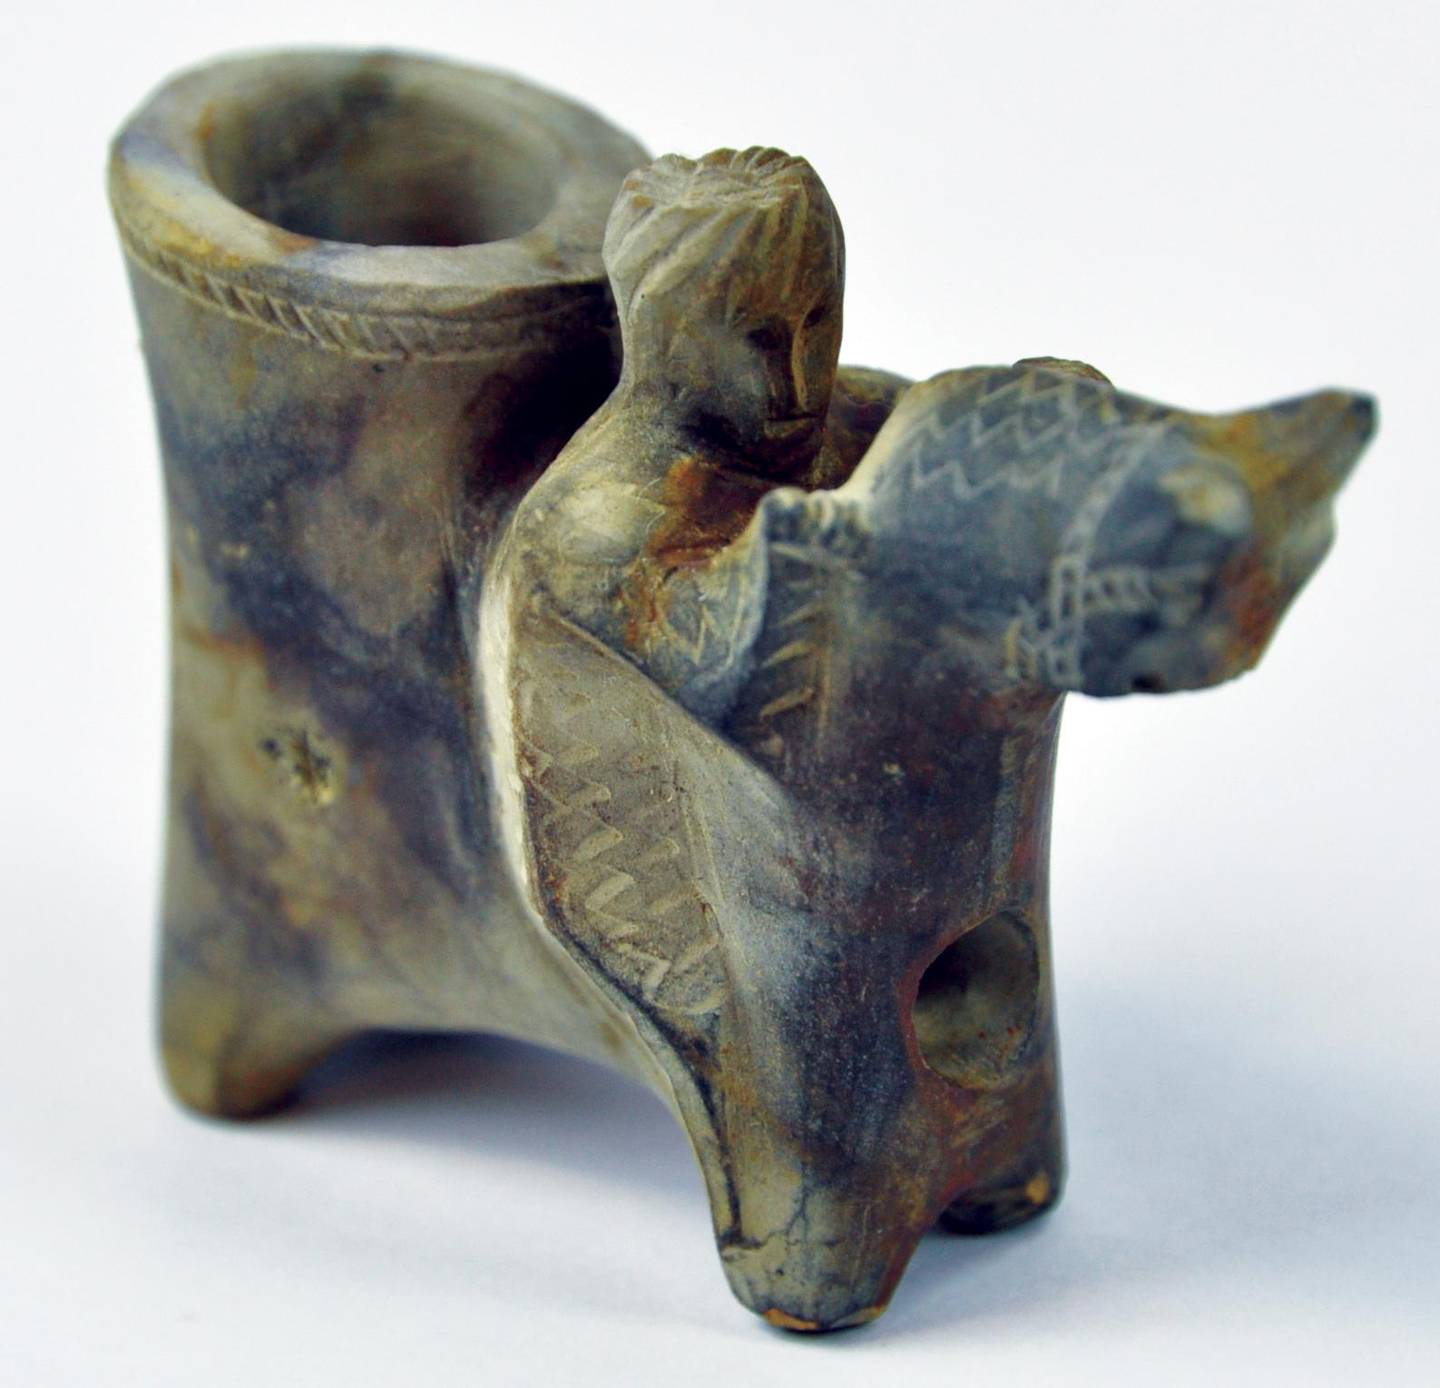 Camel and rider stone tobacco pipe found on the Ottoman trader. Enigma Recoveries. Courtesy Enigma Recoveries